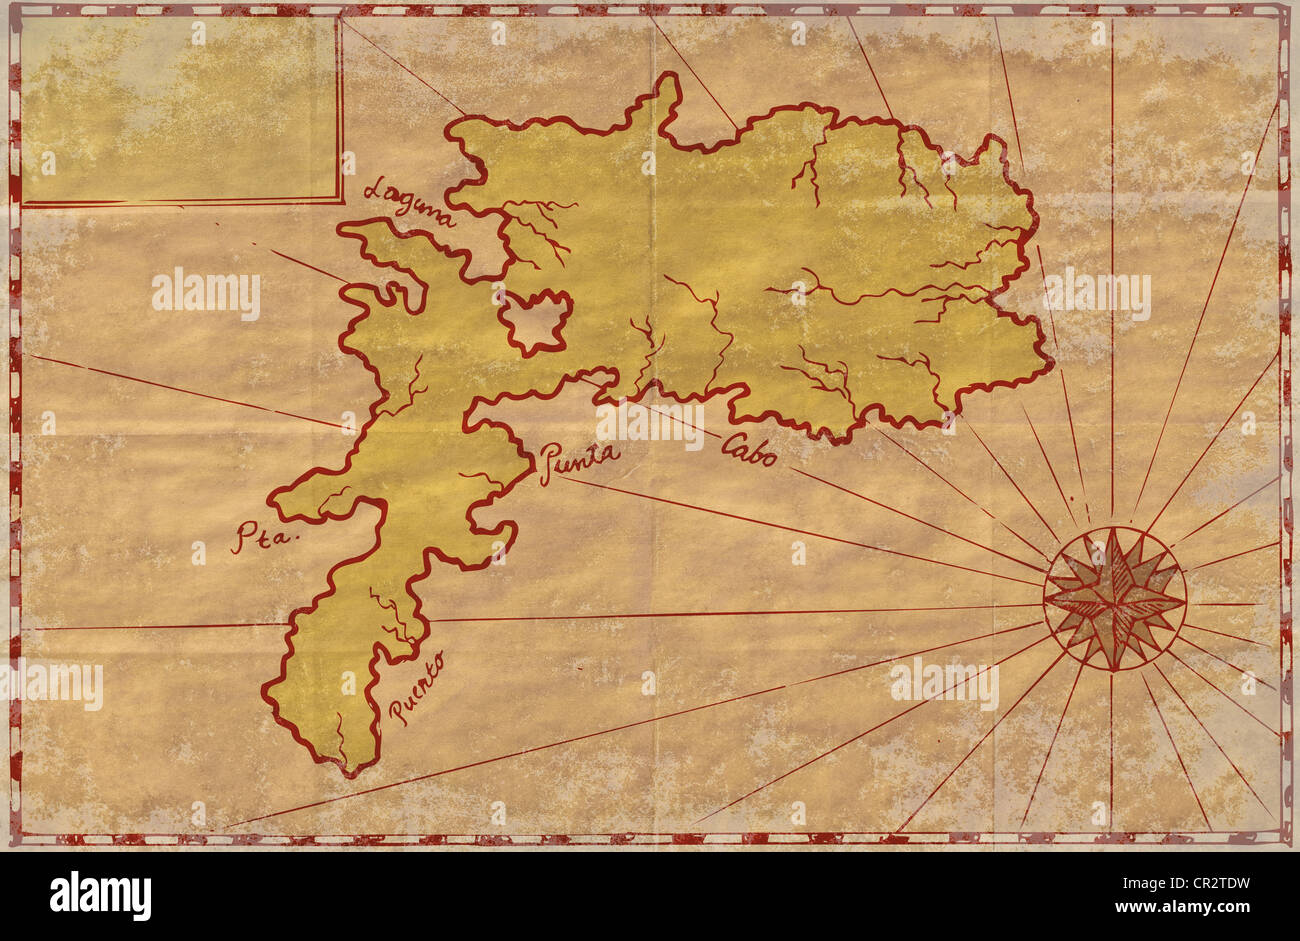 Ilustration of a treasure map showing island with coast and compass star done in vintage style. Stock Photo